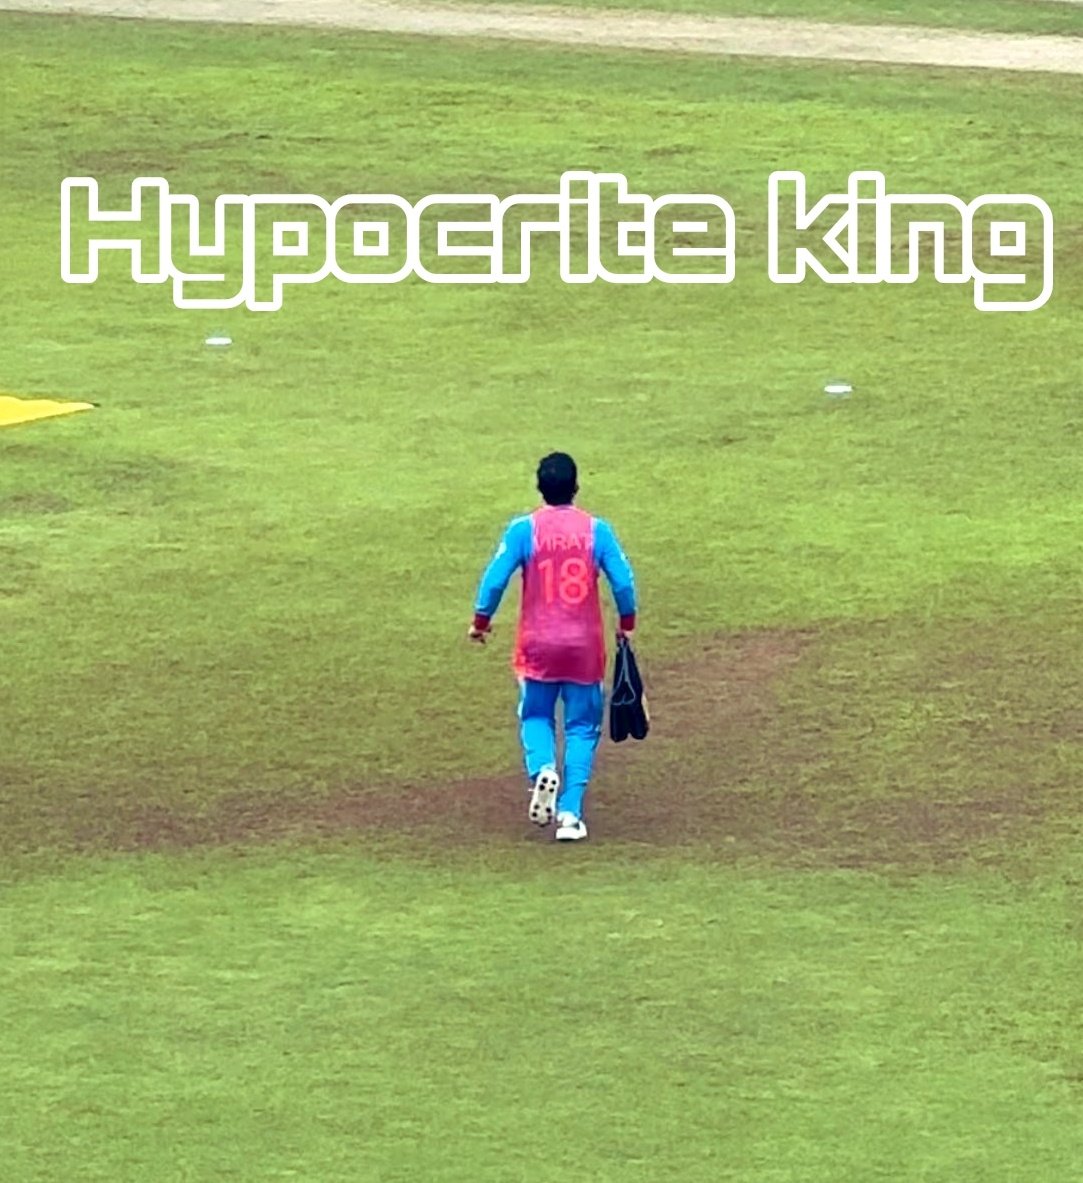 Reasons to hate virat kohli ~ • Exposing his hypocrisy, insecurity , and jealousy ! A thread 🧵-